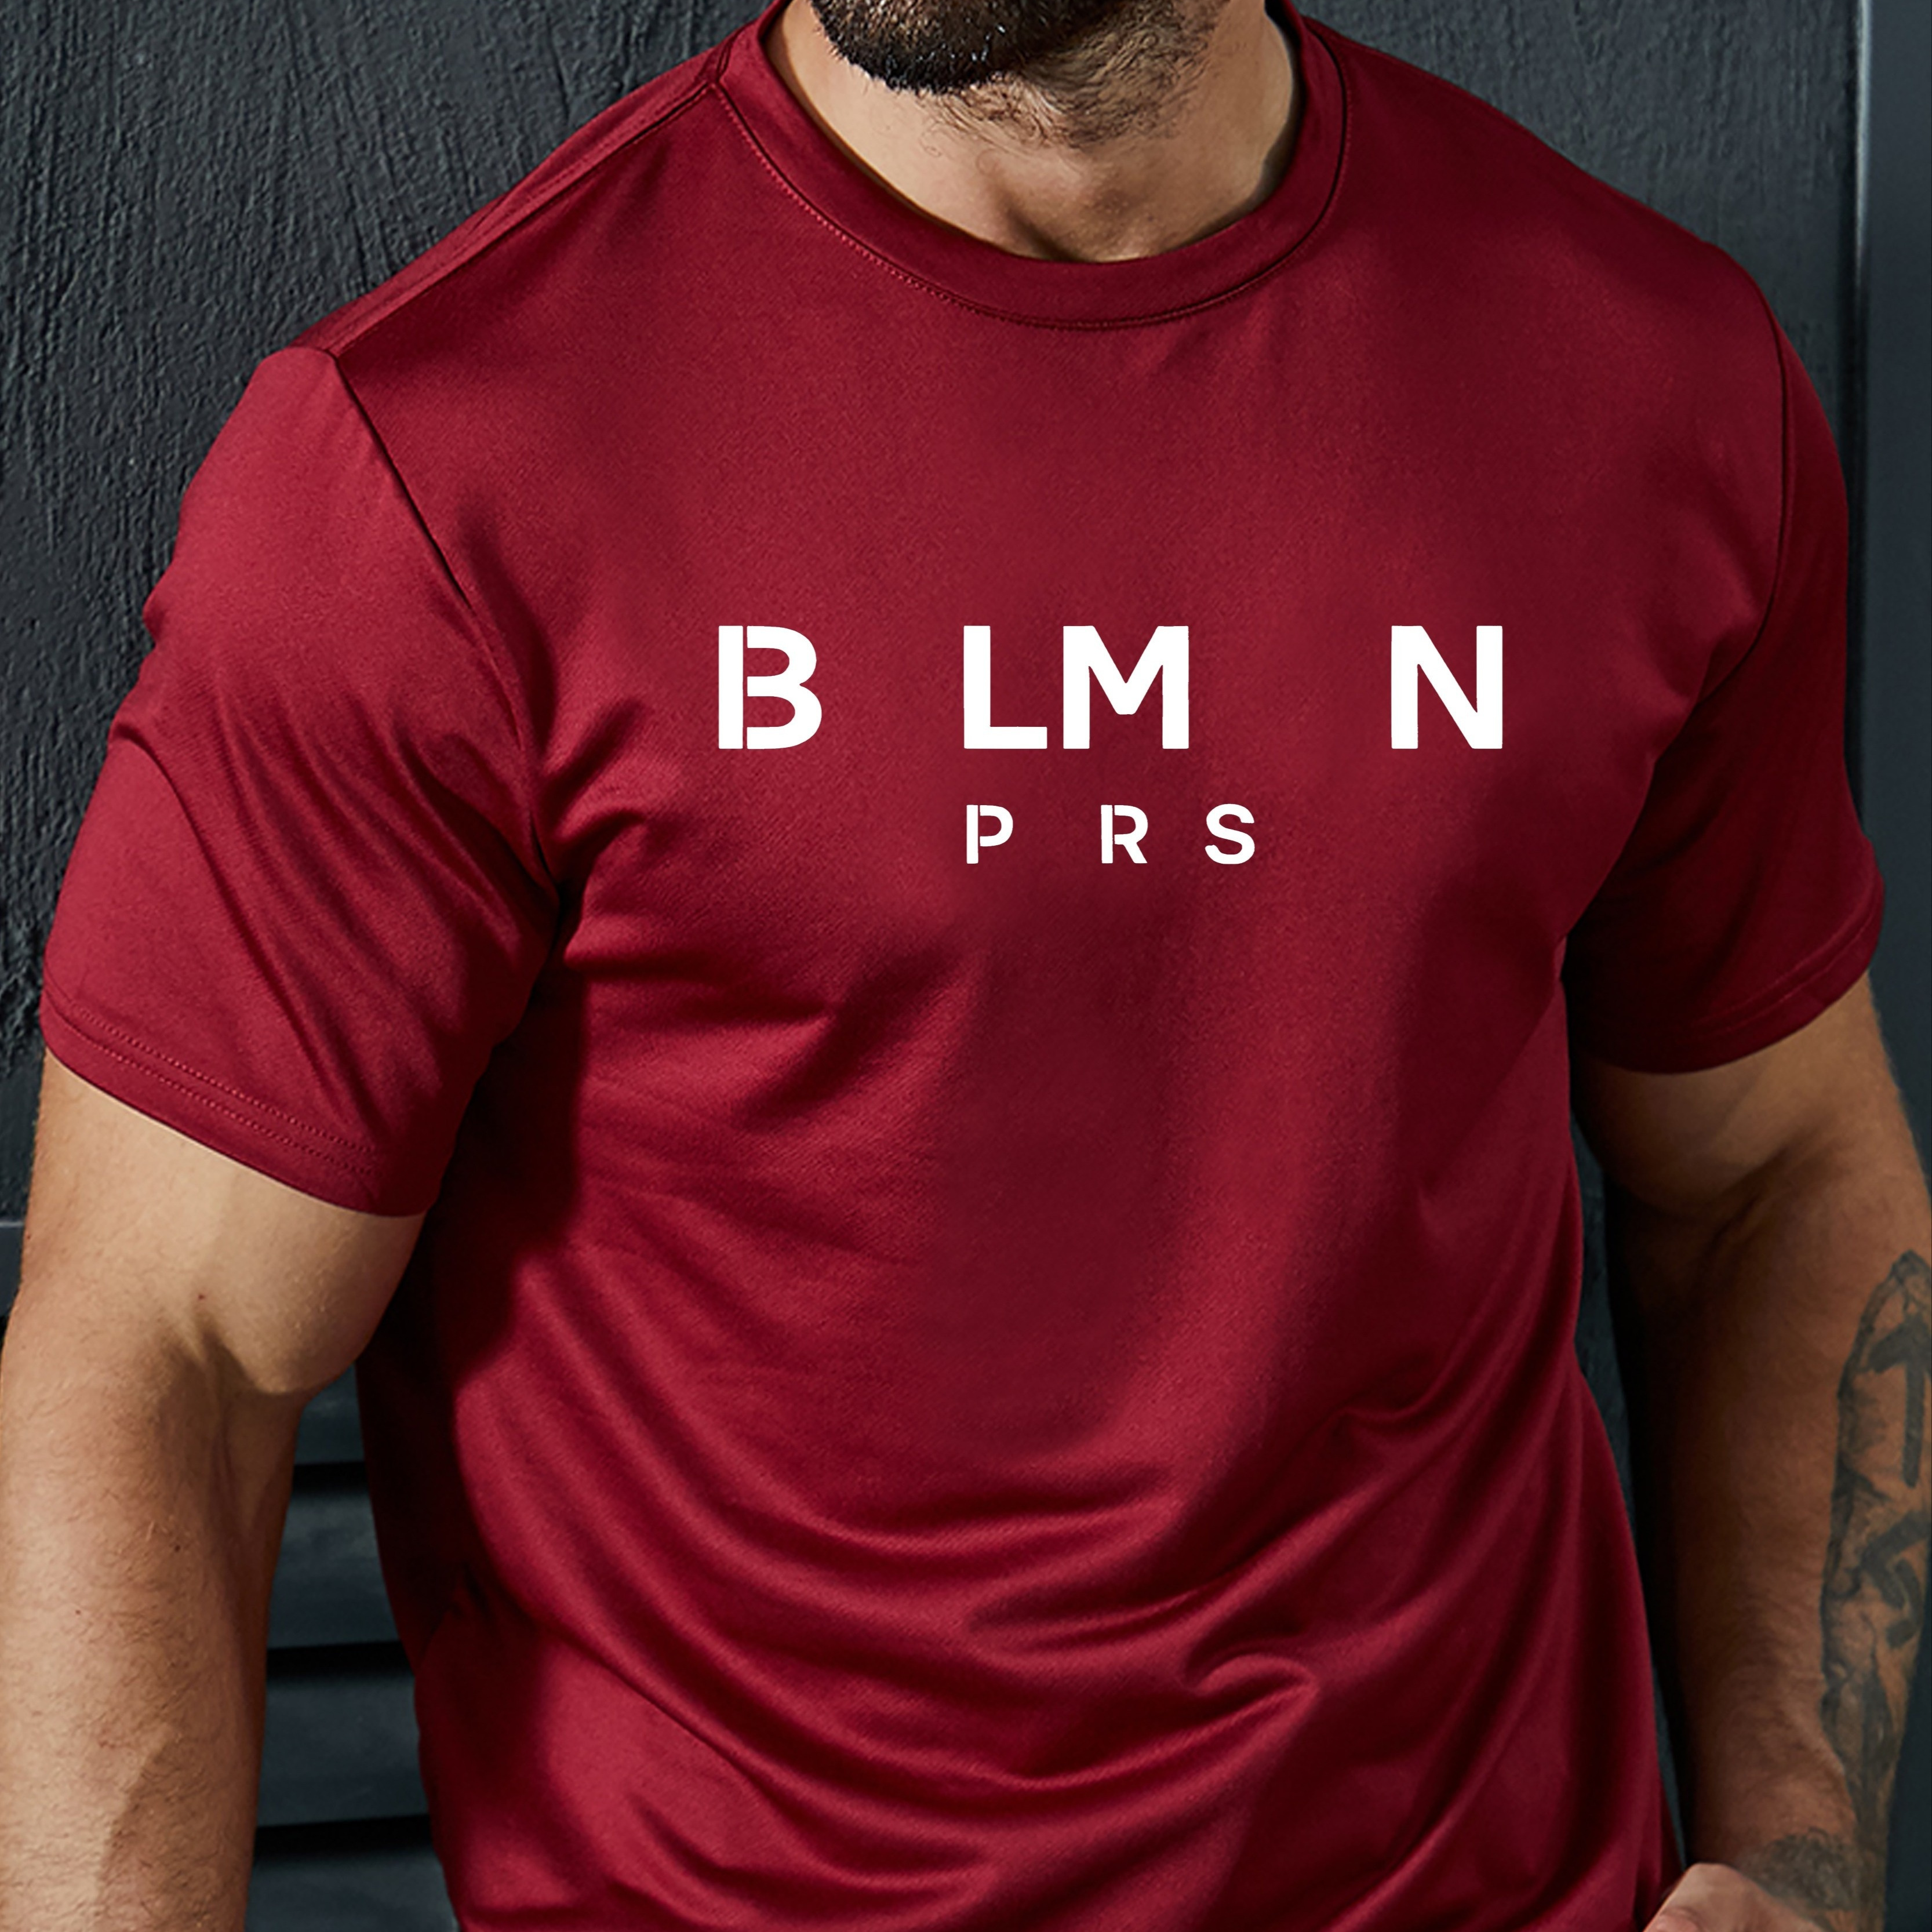 

B Lm N Print, Men's Crew Neck Short Sleeve Tee Fashion Street Style T-shirt, Casual Comfy Breathable Top For Spring Summer Holiday Leisure Vacation Men's Clothing As Gift